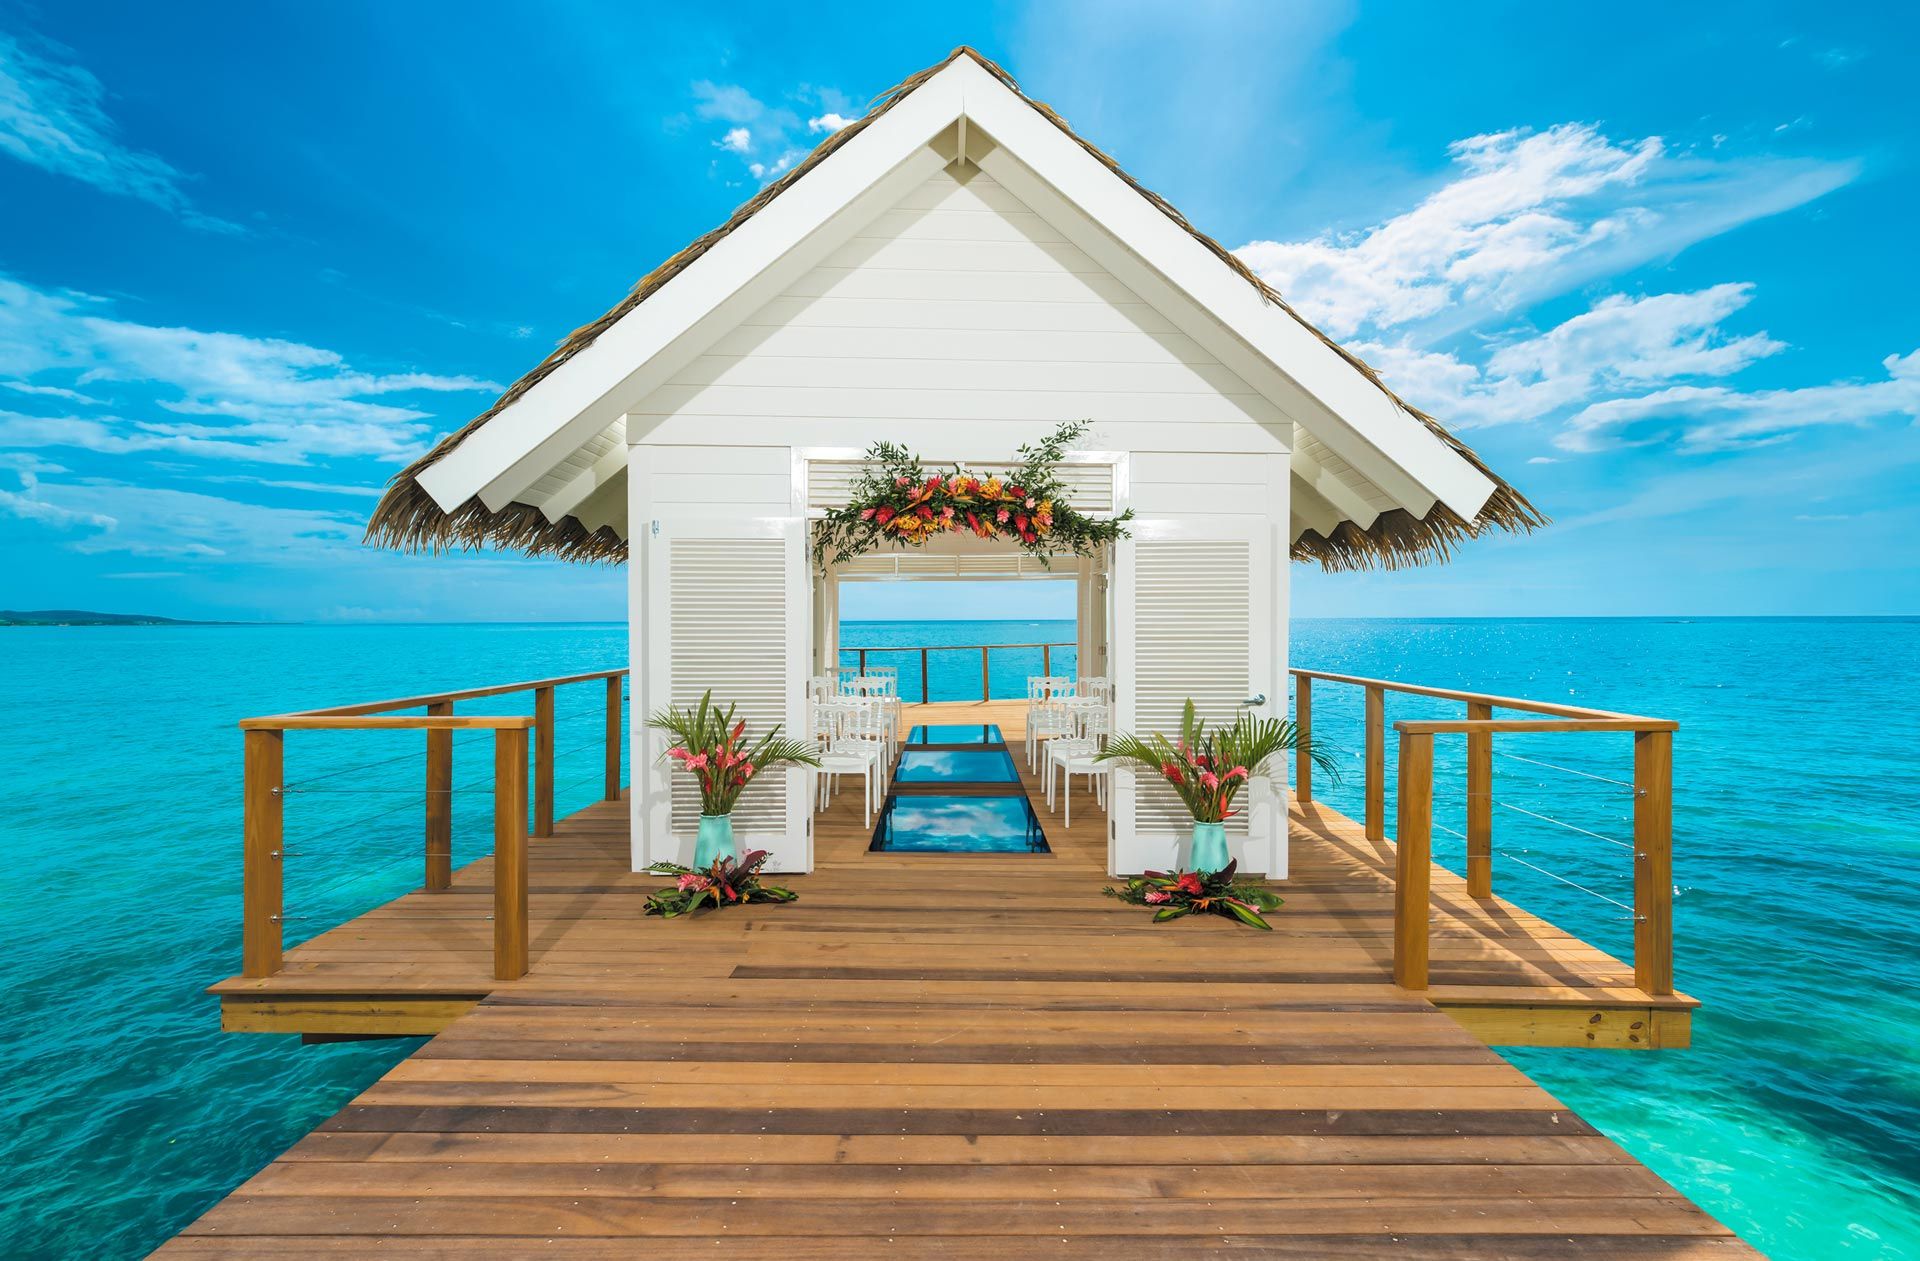 Sandals-South-Coast-Over-the-Water-Chapel---6